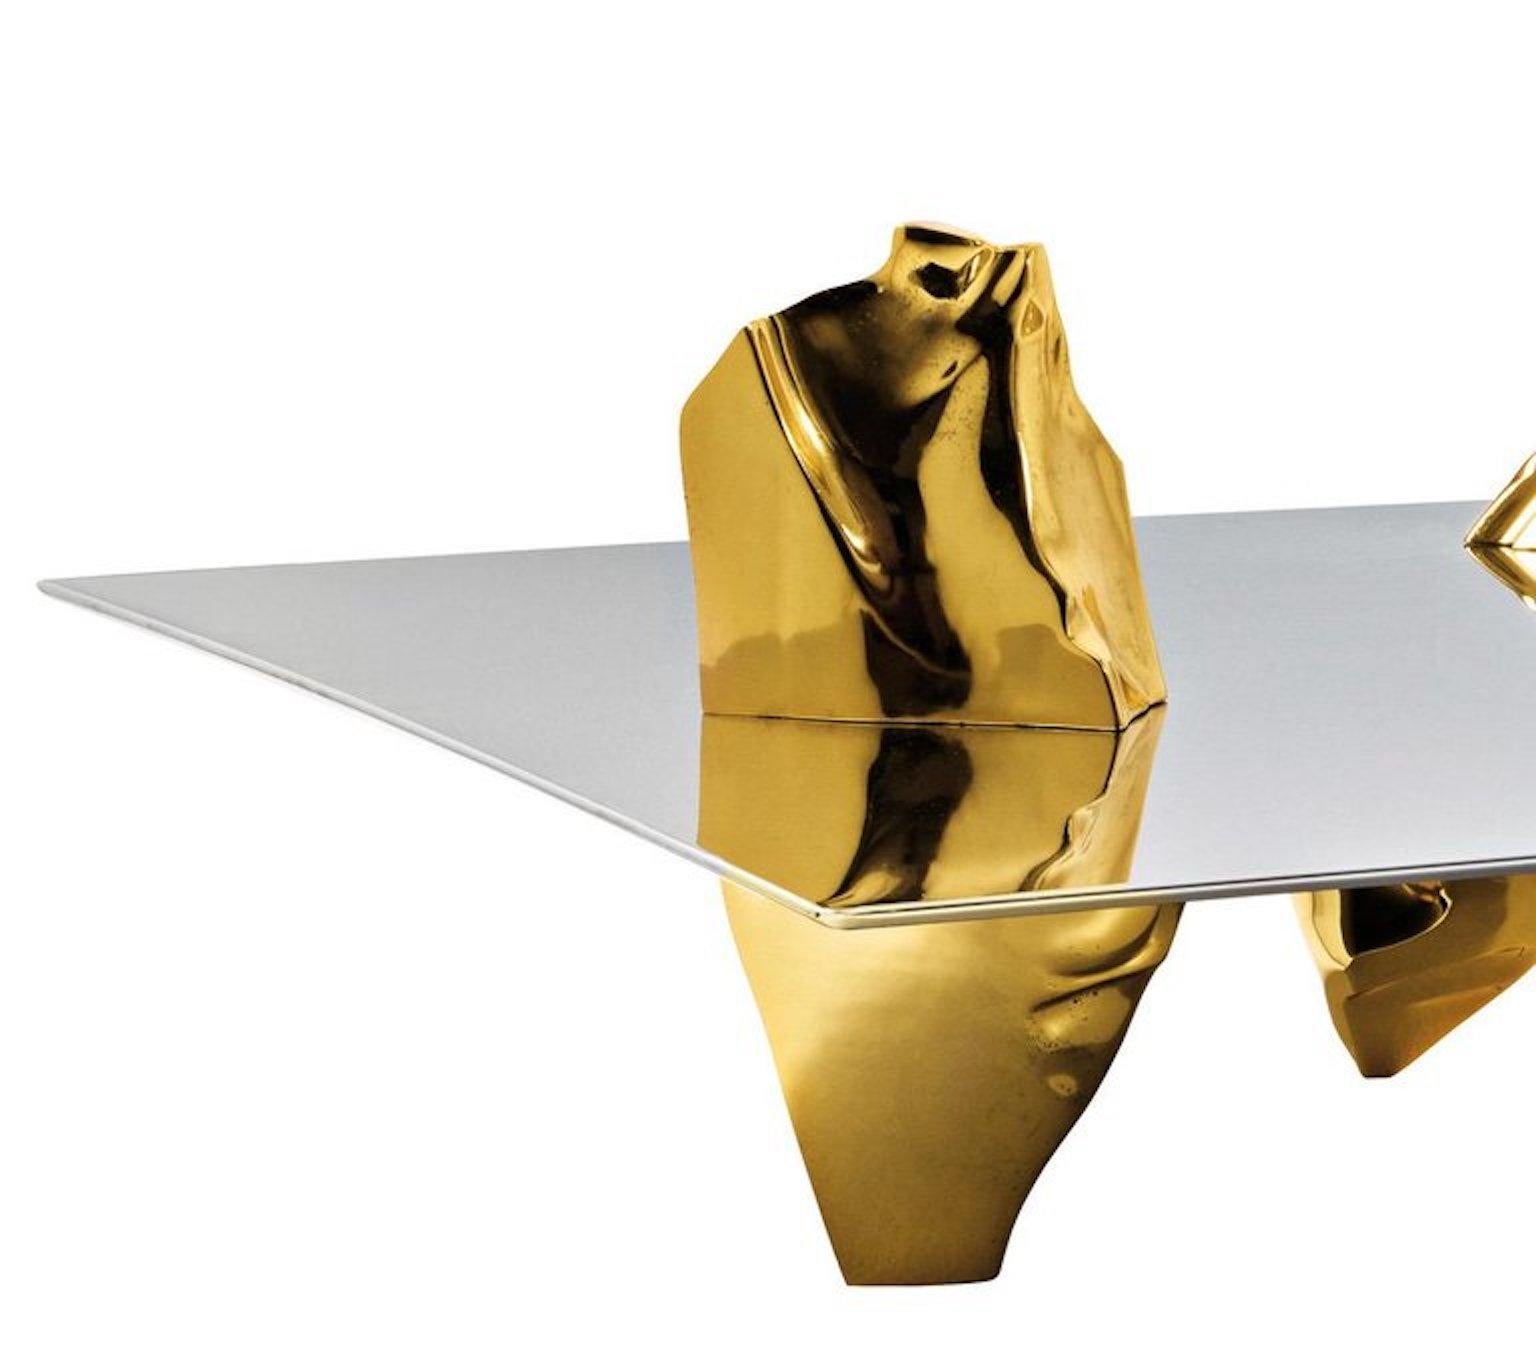 Coffee table/sculpture legs in polished cast aluminum gold-plated finished and MDF top with mirror polished stainless steel coating.